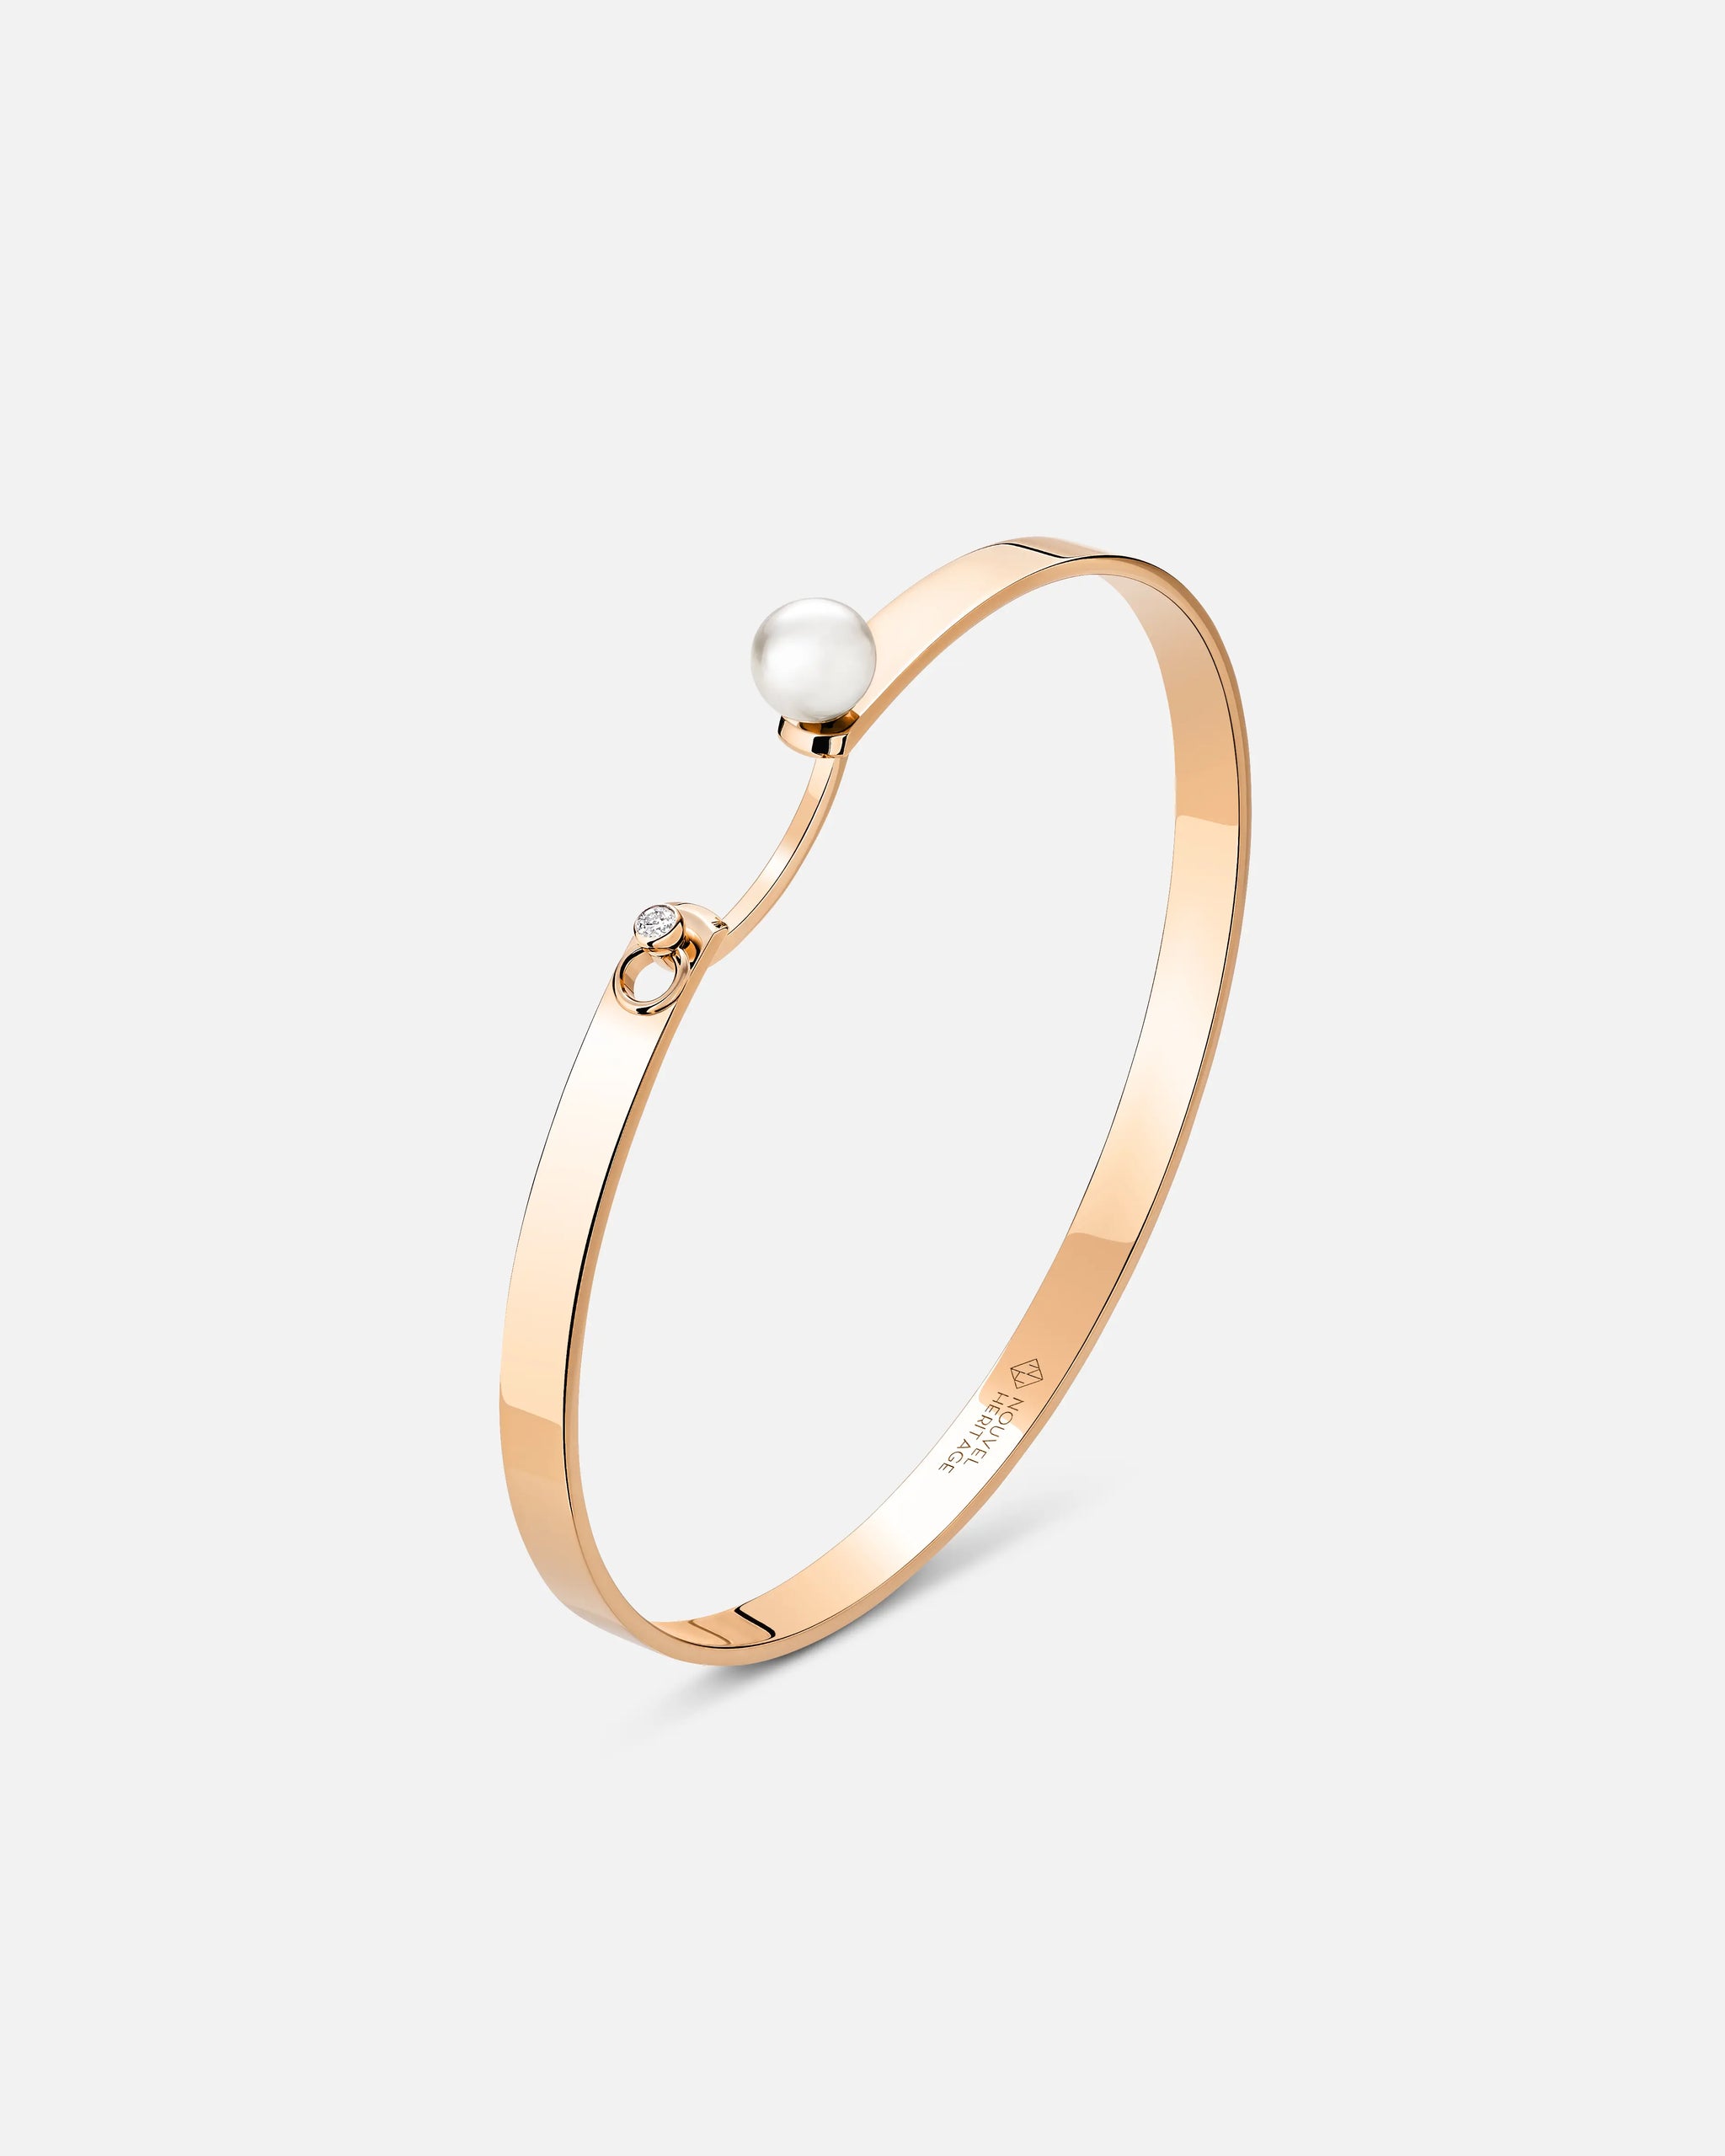 Lunch With Mom Mood Bangle in Rose Gold - 1 - Nouvel Heritage